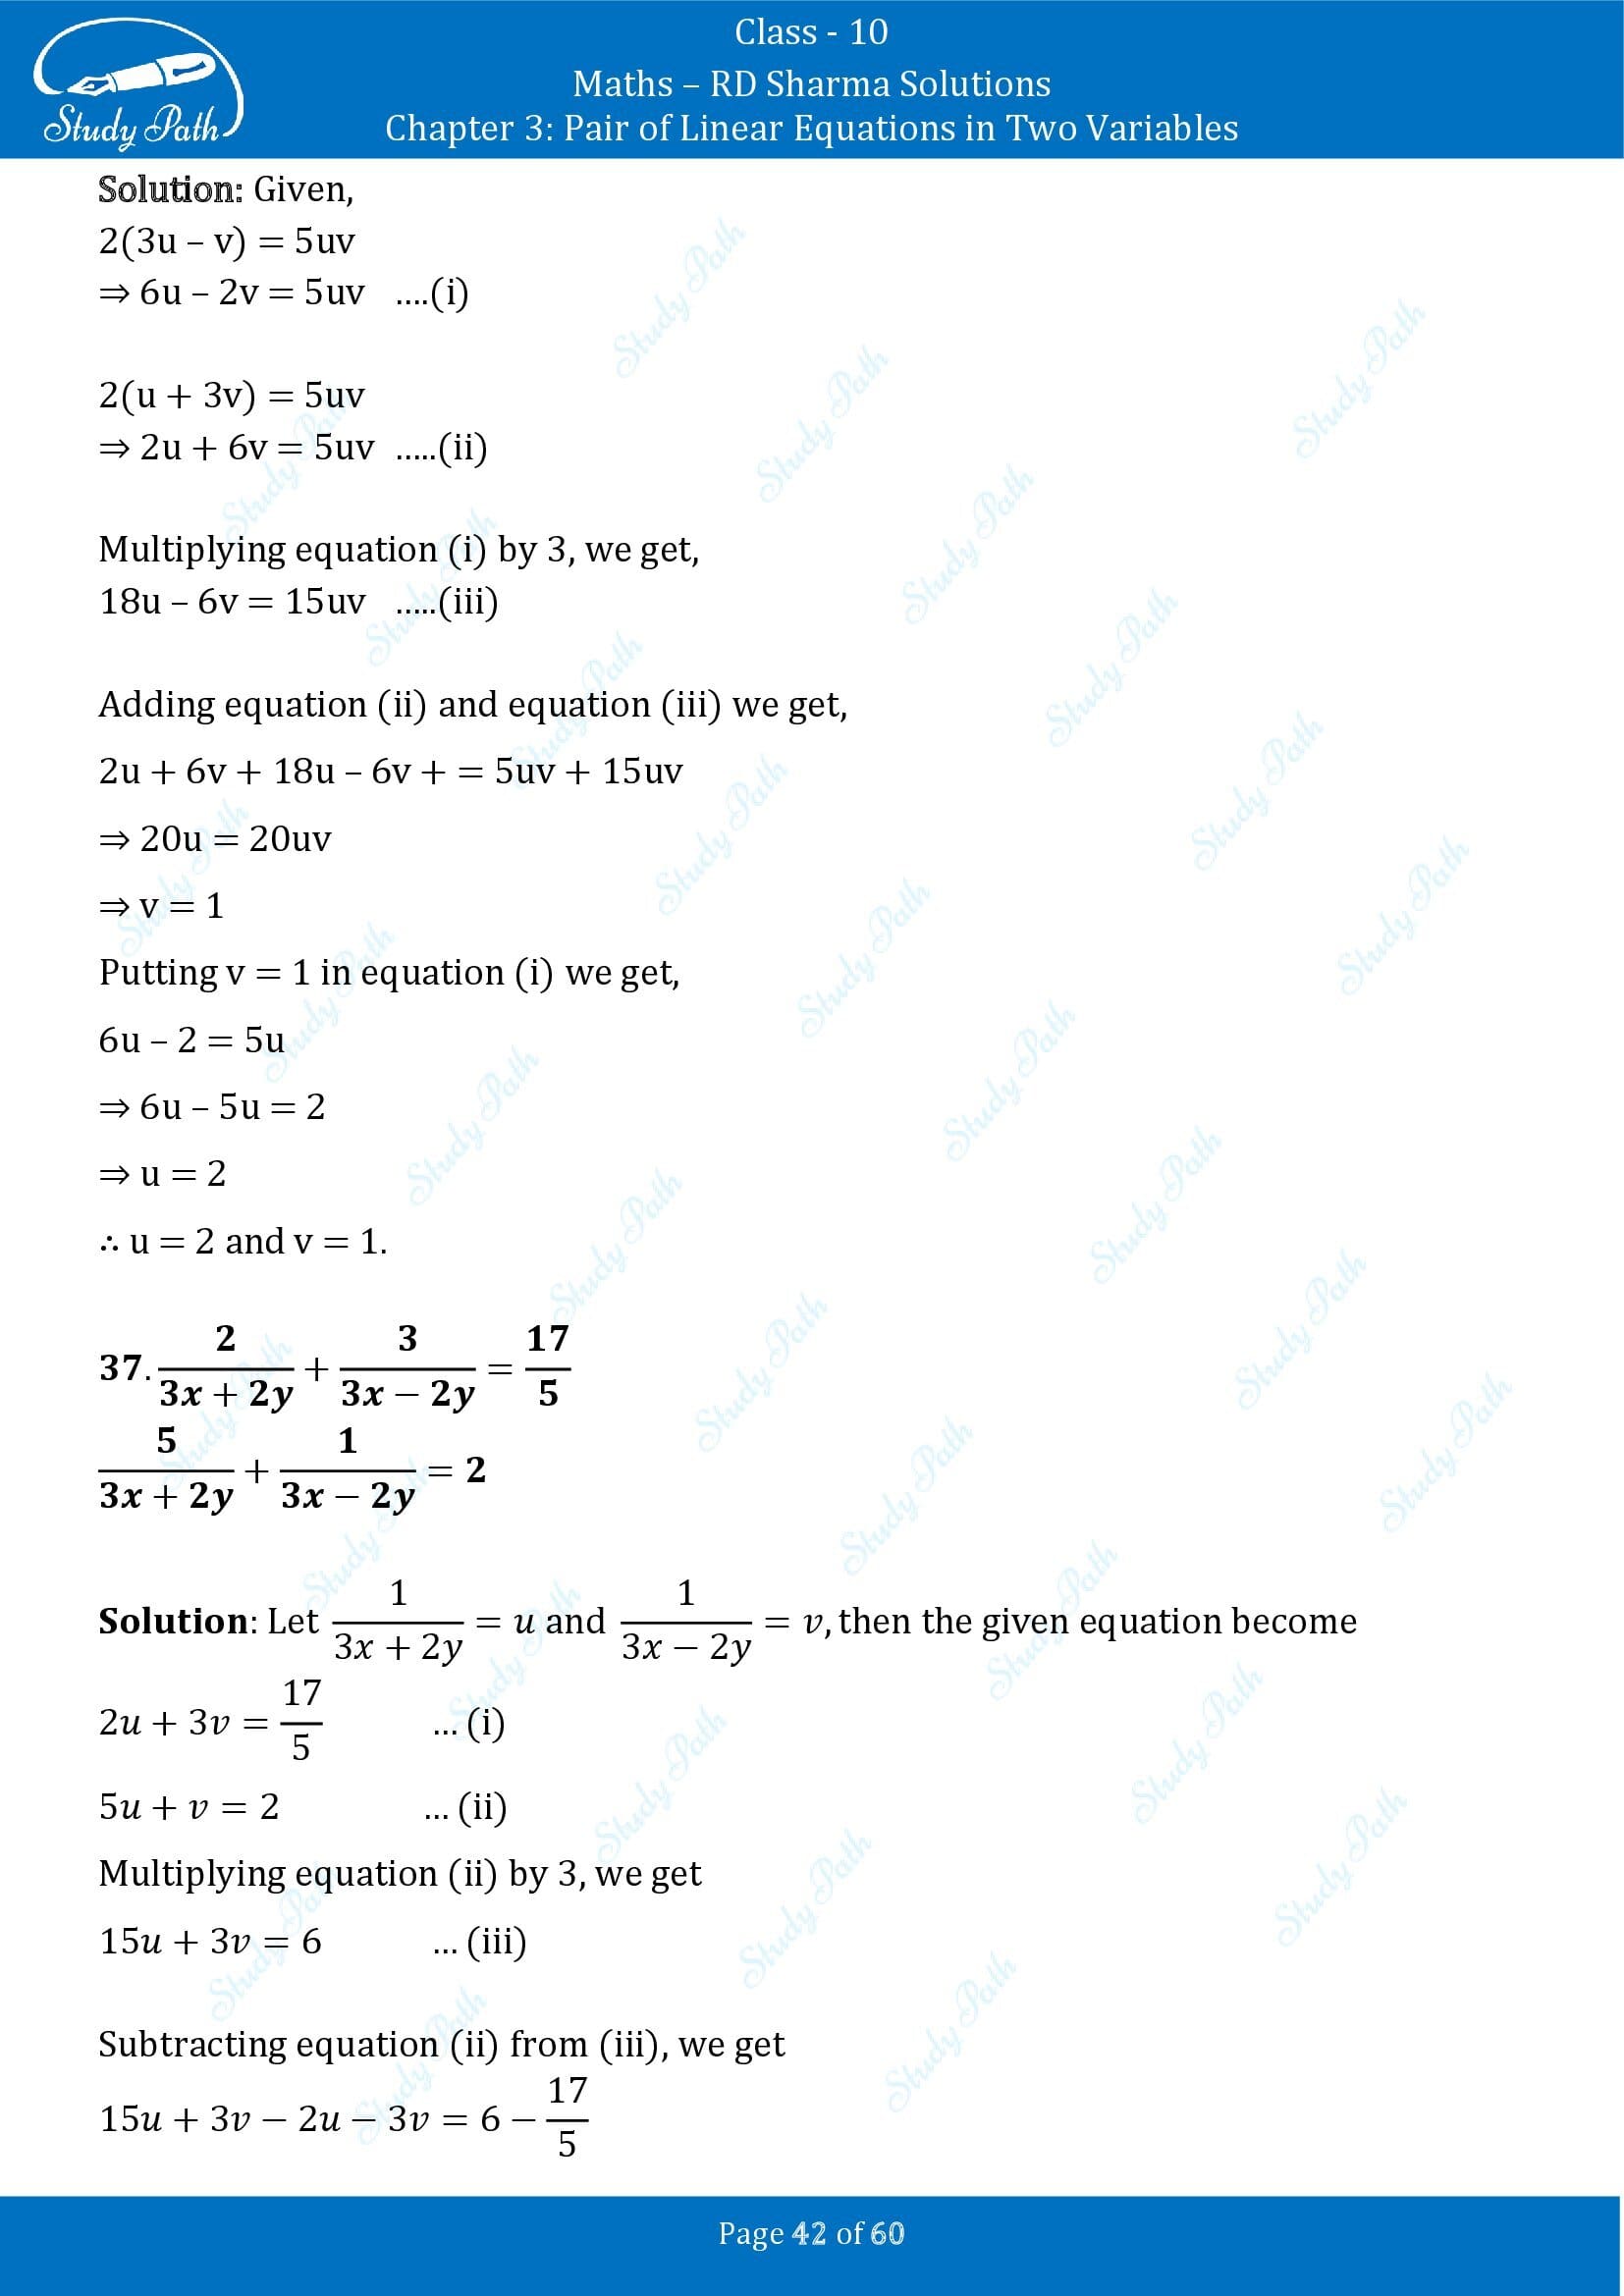 RD Sharma Solutions Class 10 Chapter 3 Pair of Linear Equations in Two Variables Exercise 3.3 00042